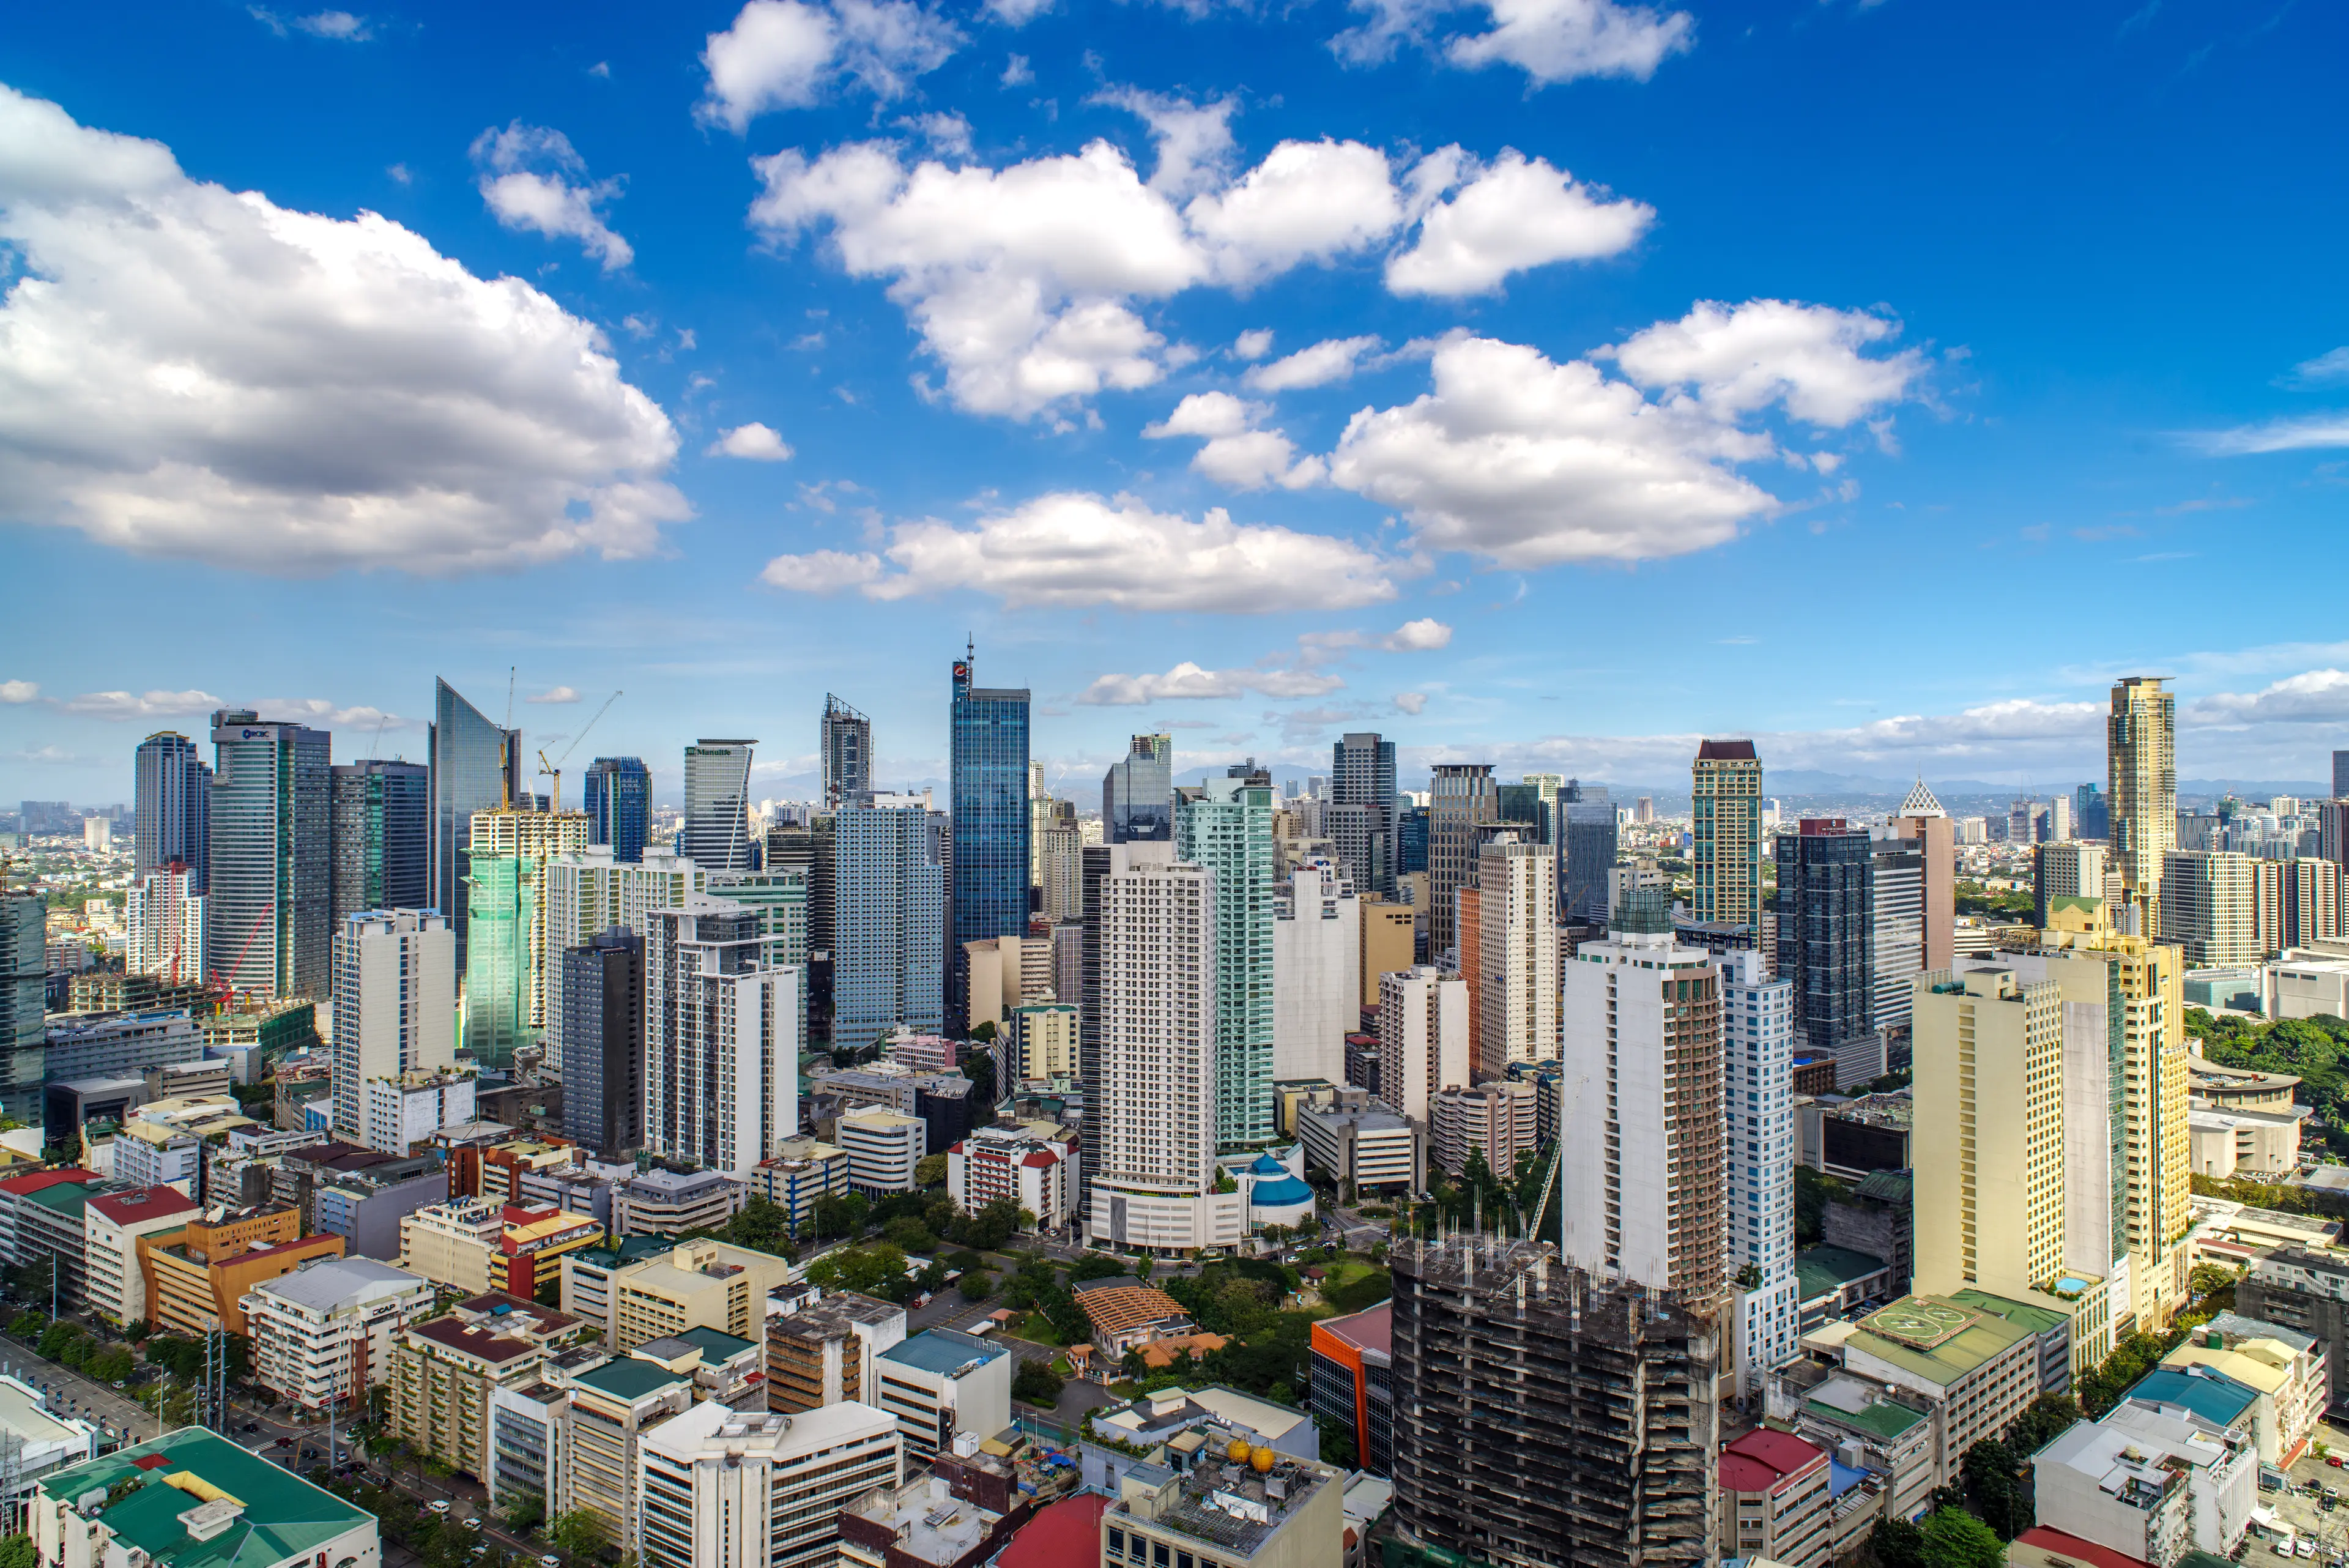 4-Day Exciting Family Adventure and Sightseeing in Manila